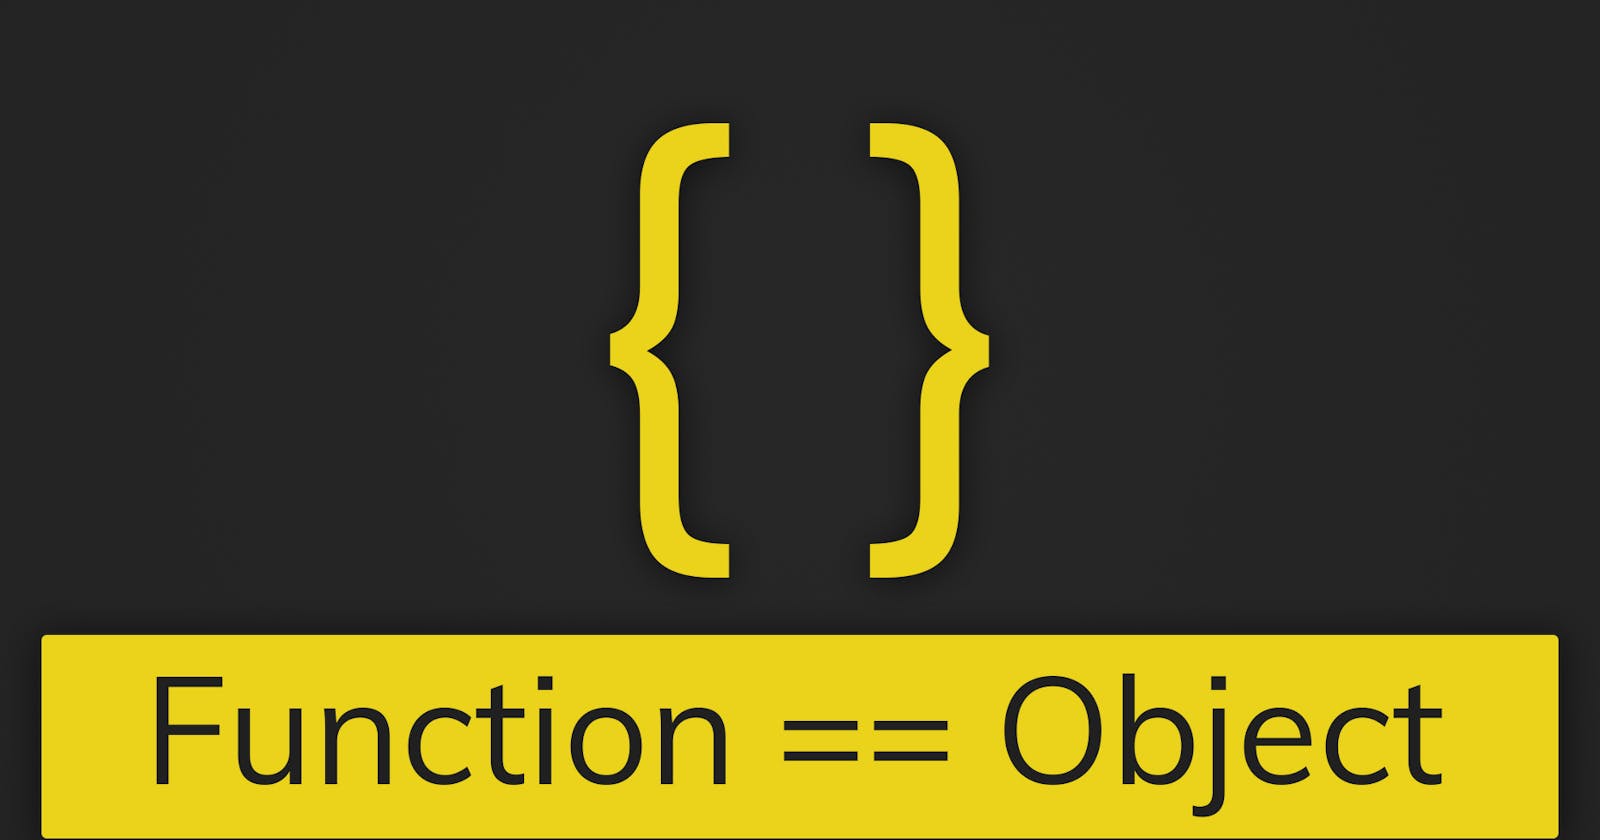 Function = Object